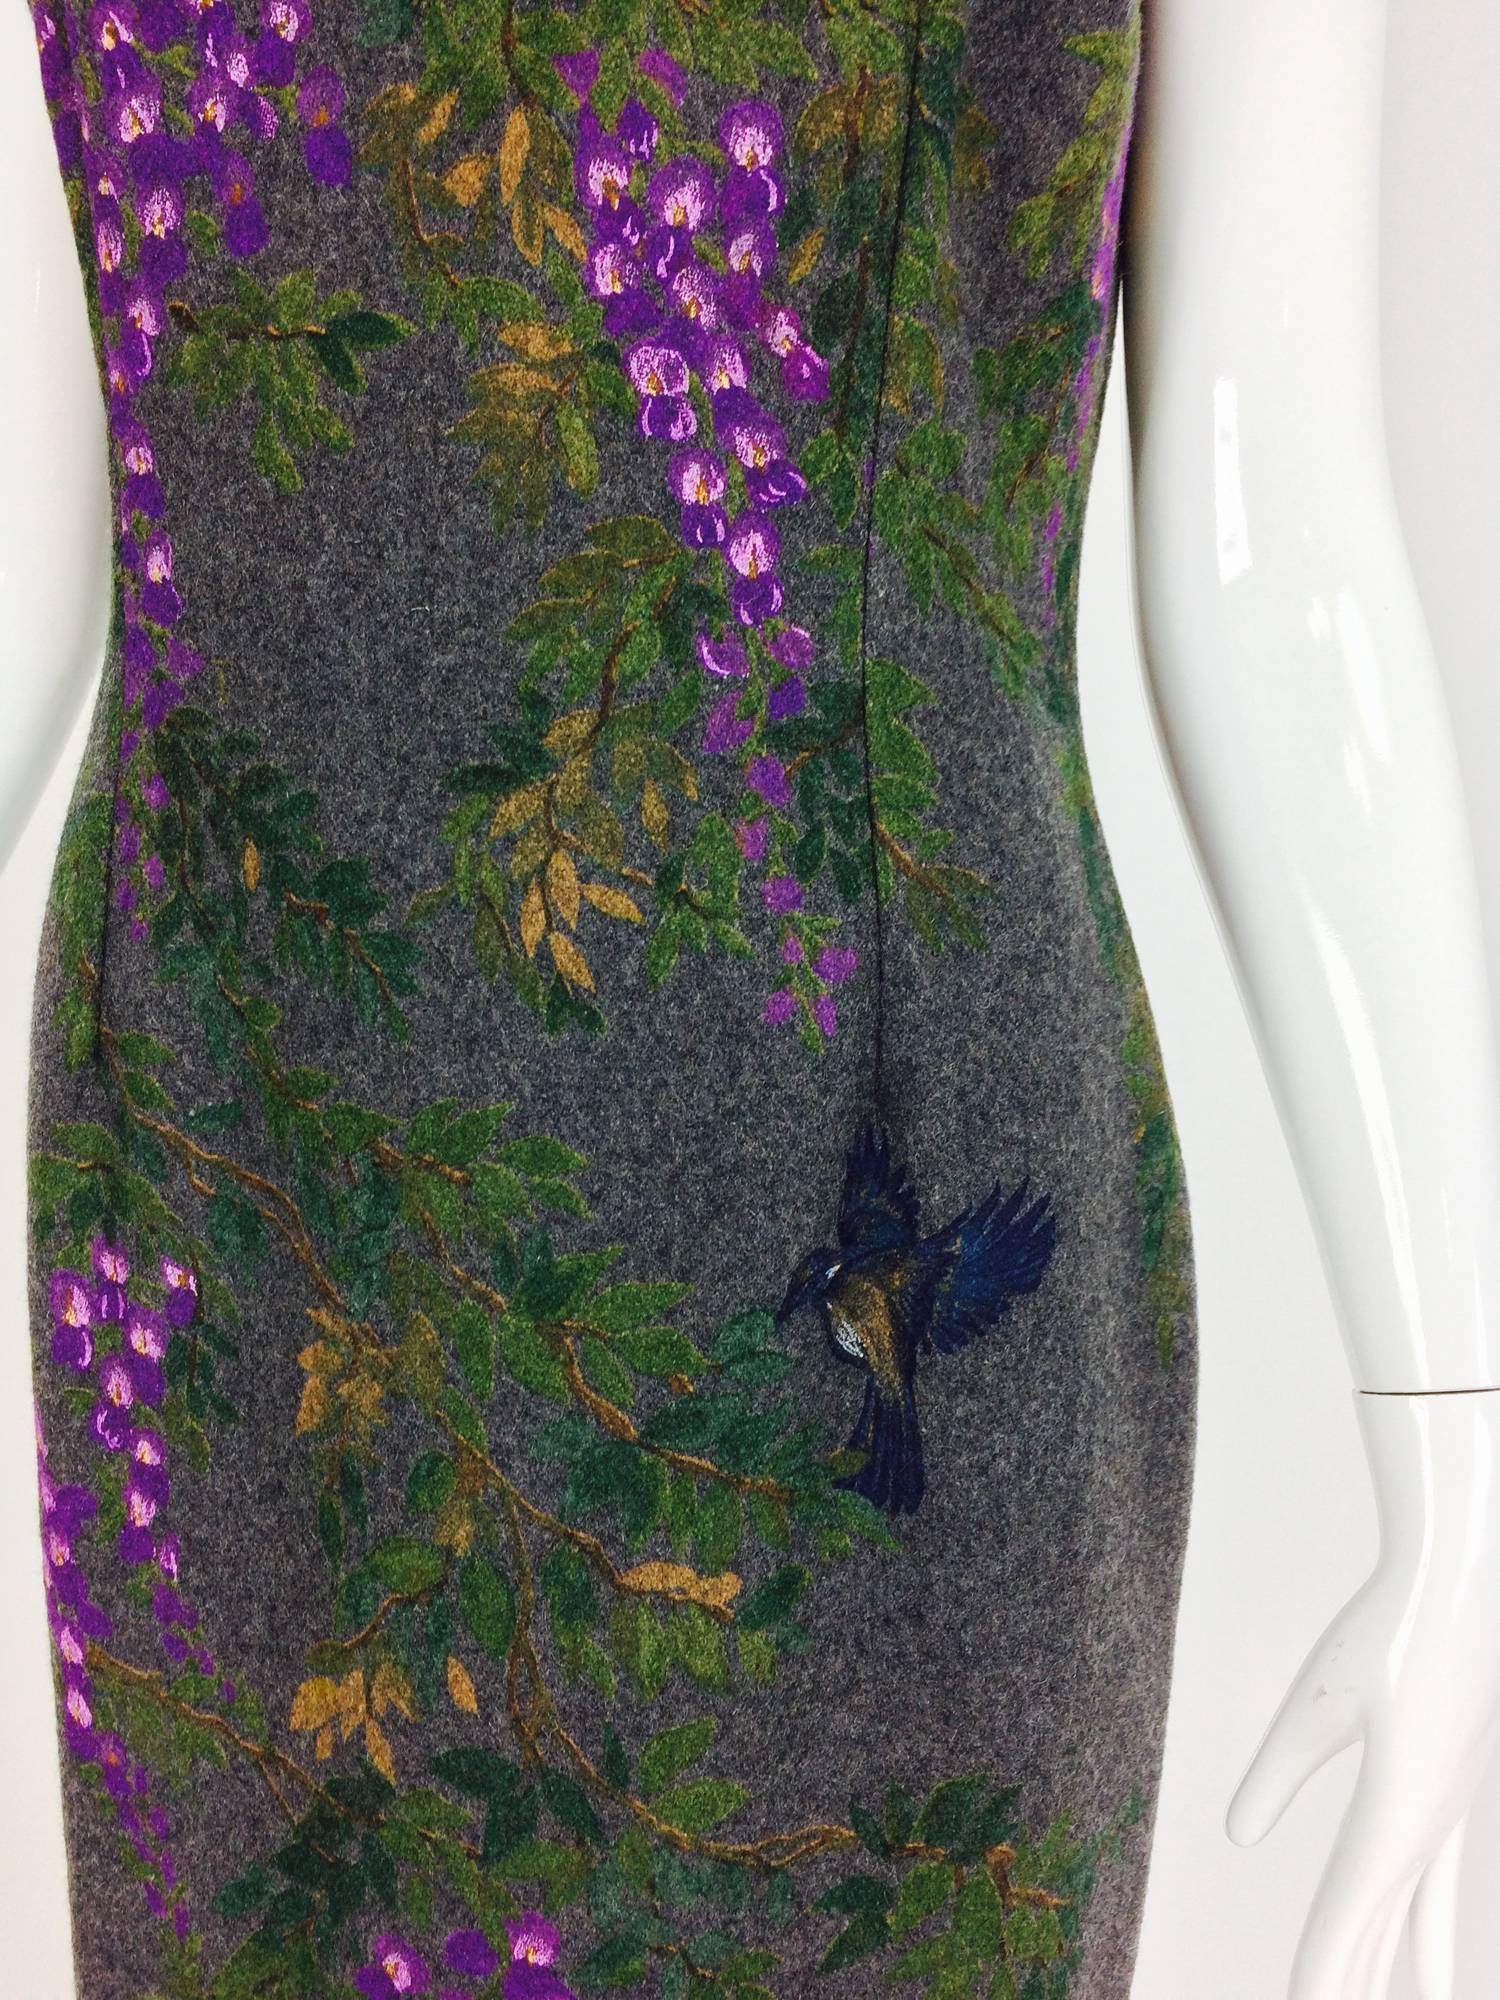 Dolce & Gabbana hand painted wisteria with birds grey flannel sheath dress...Sheath dress with shoulder straps that are set to the shoulder edge...The dress is beautifully hand painted with wisteria flowers and vines and scattered here and there